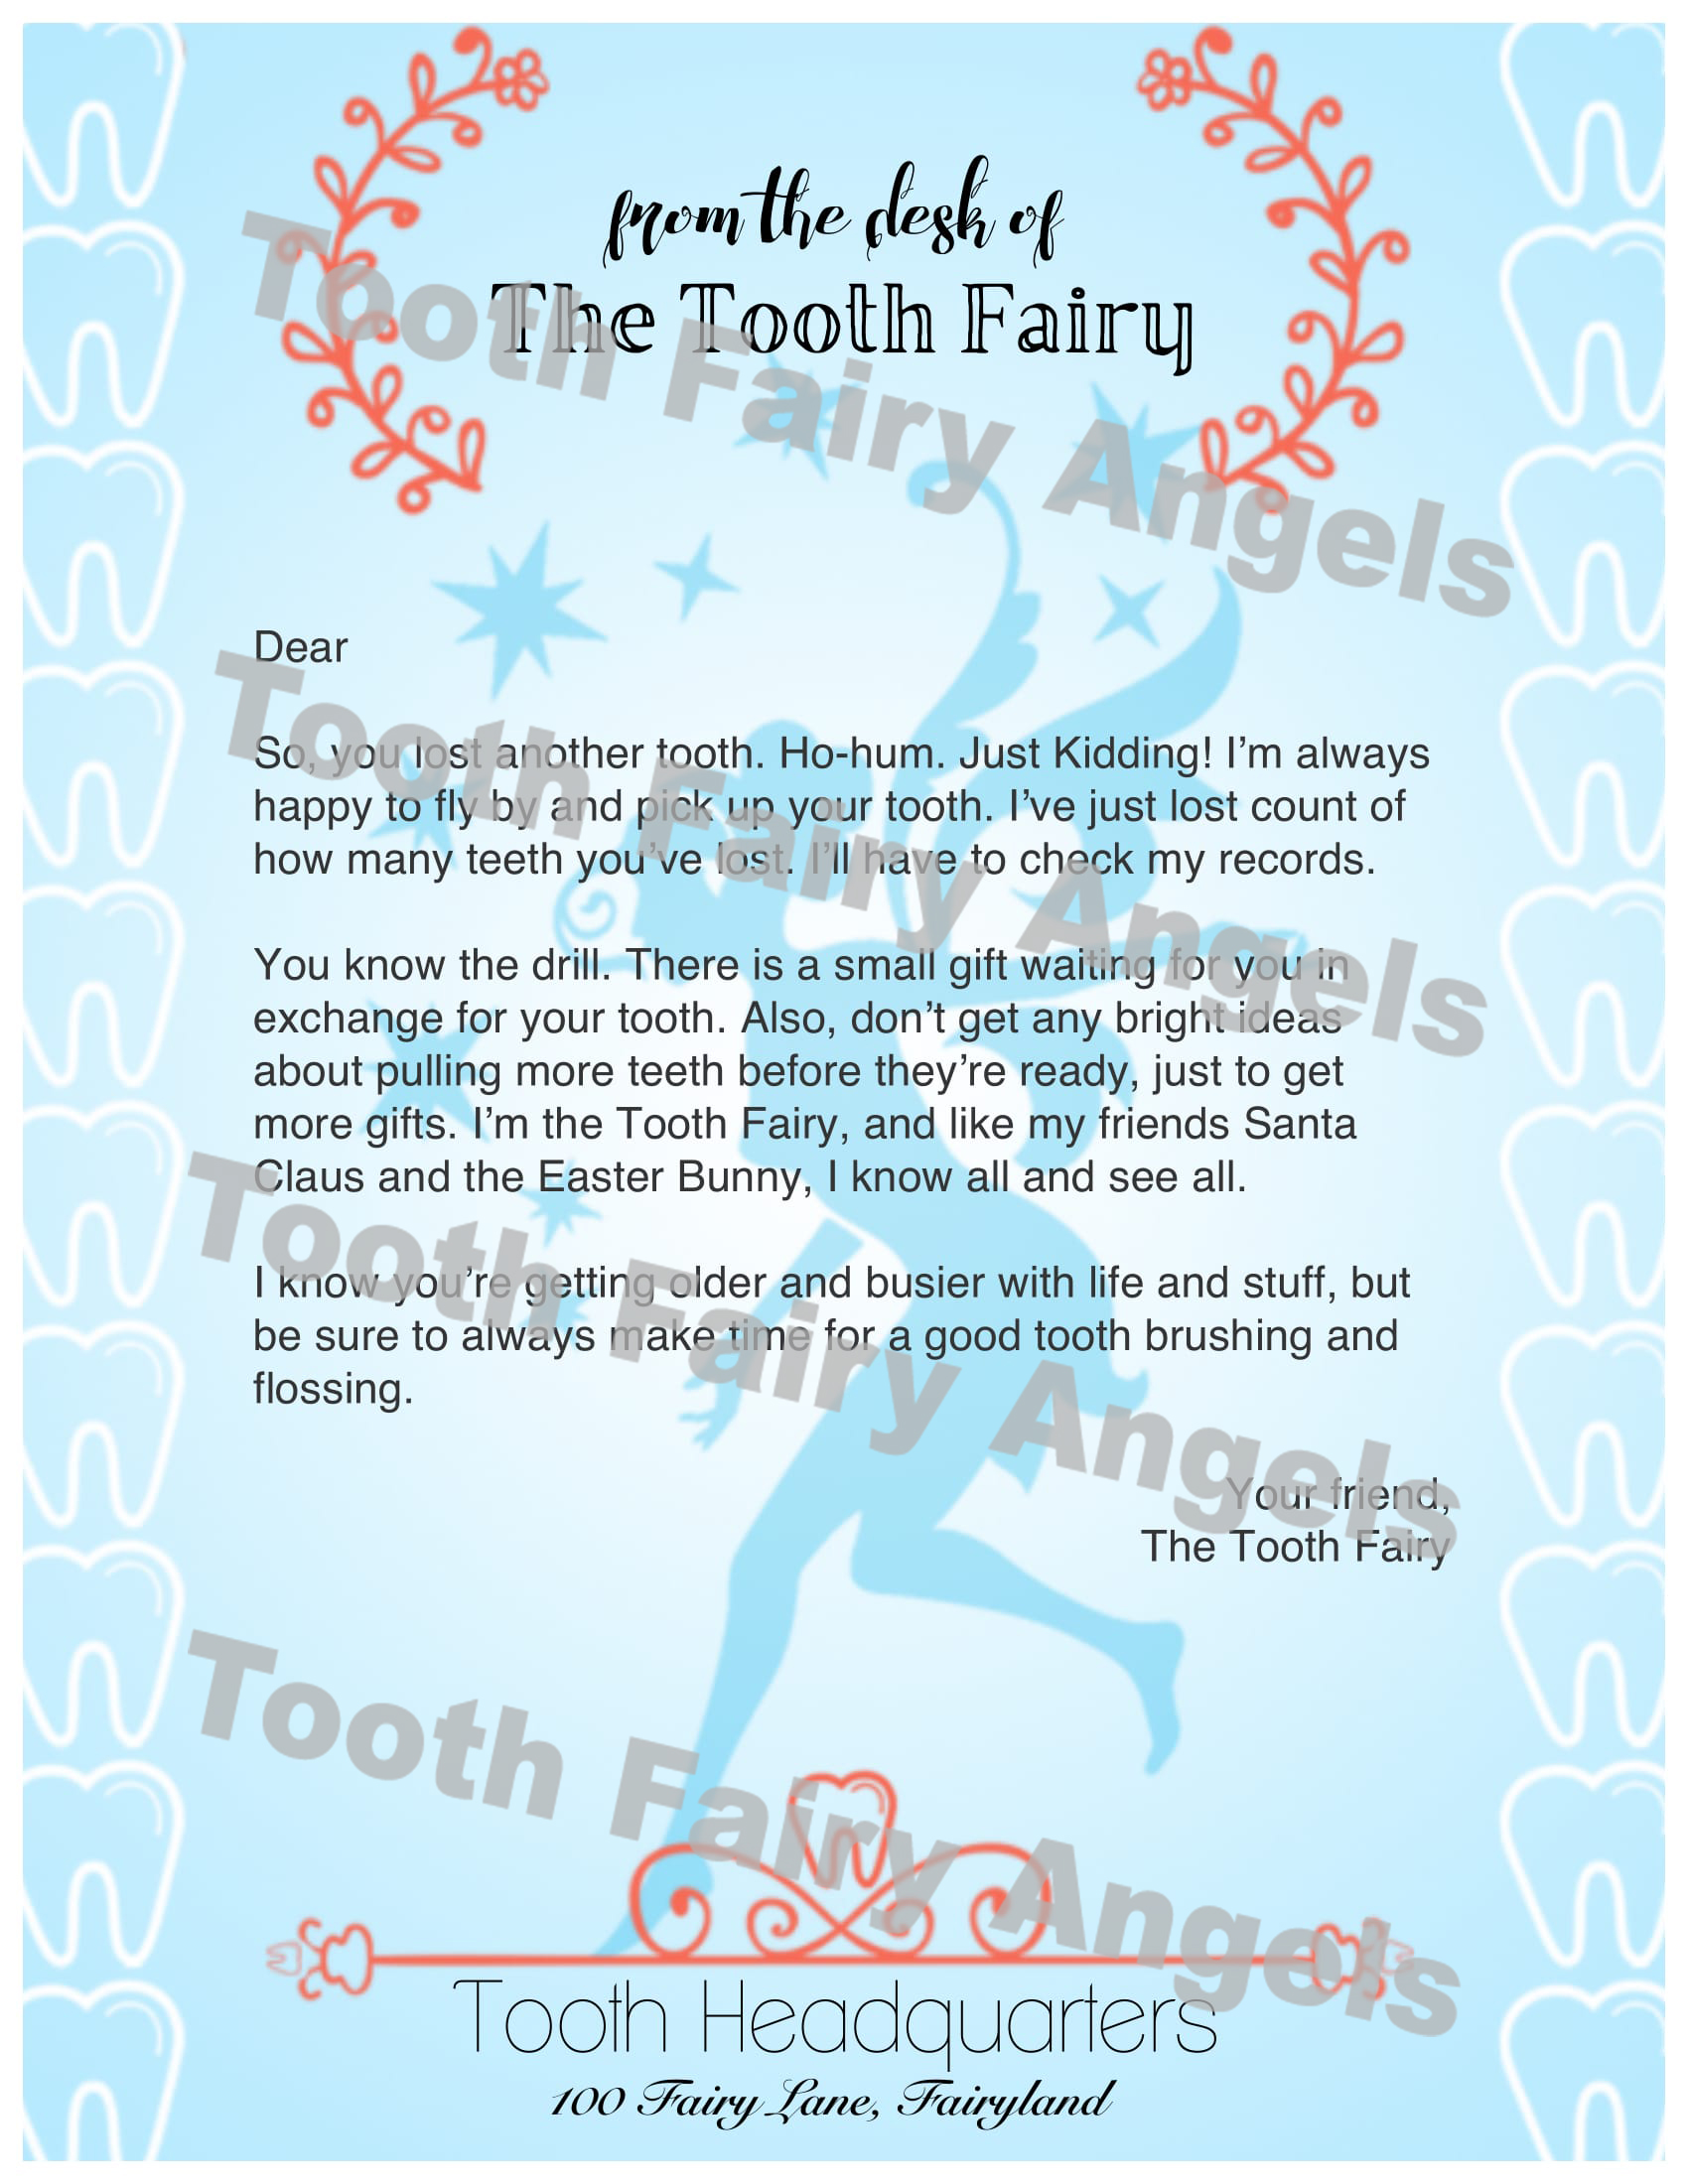 tooth-fairy-angels-letters-tooth-fairy-angels